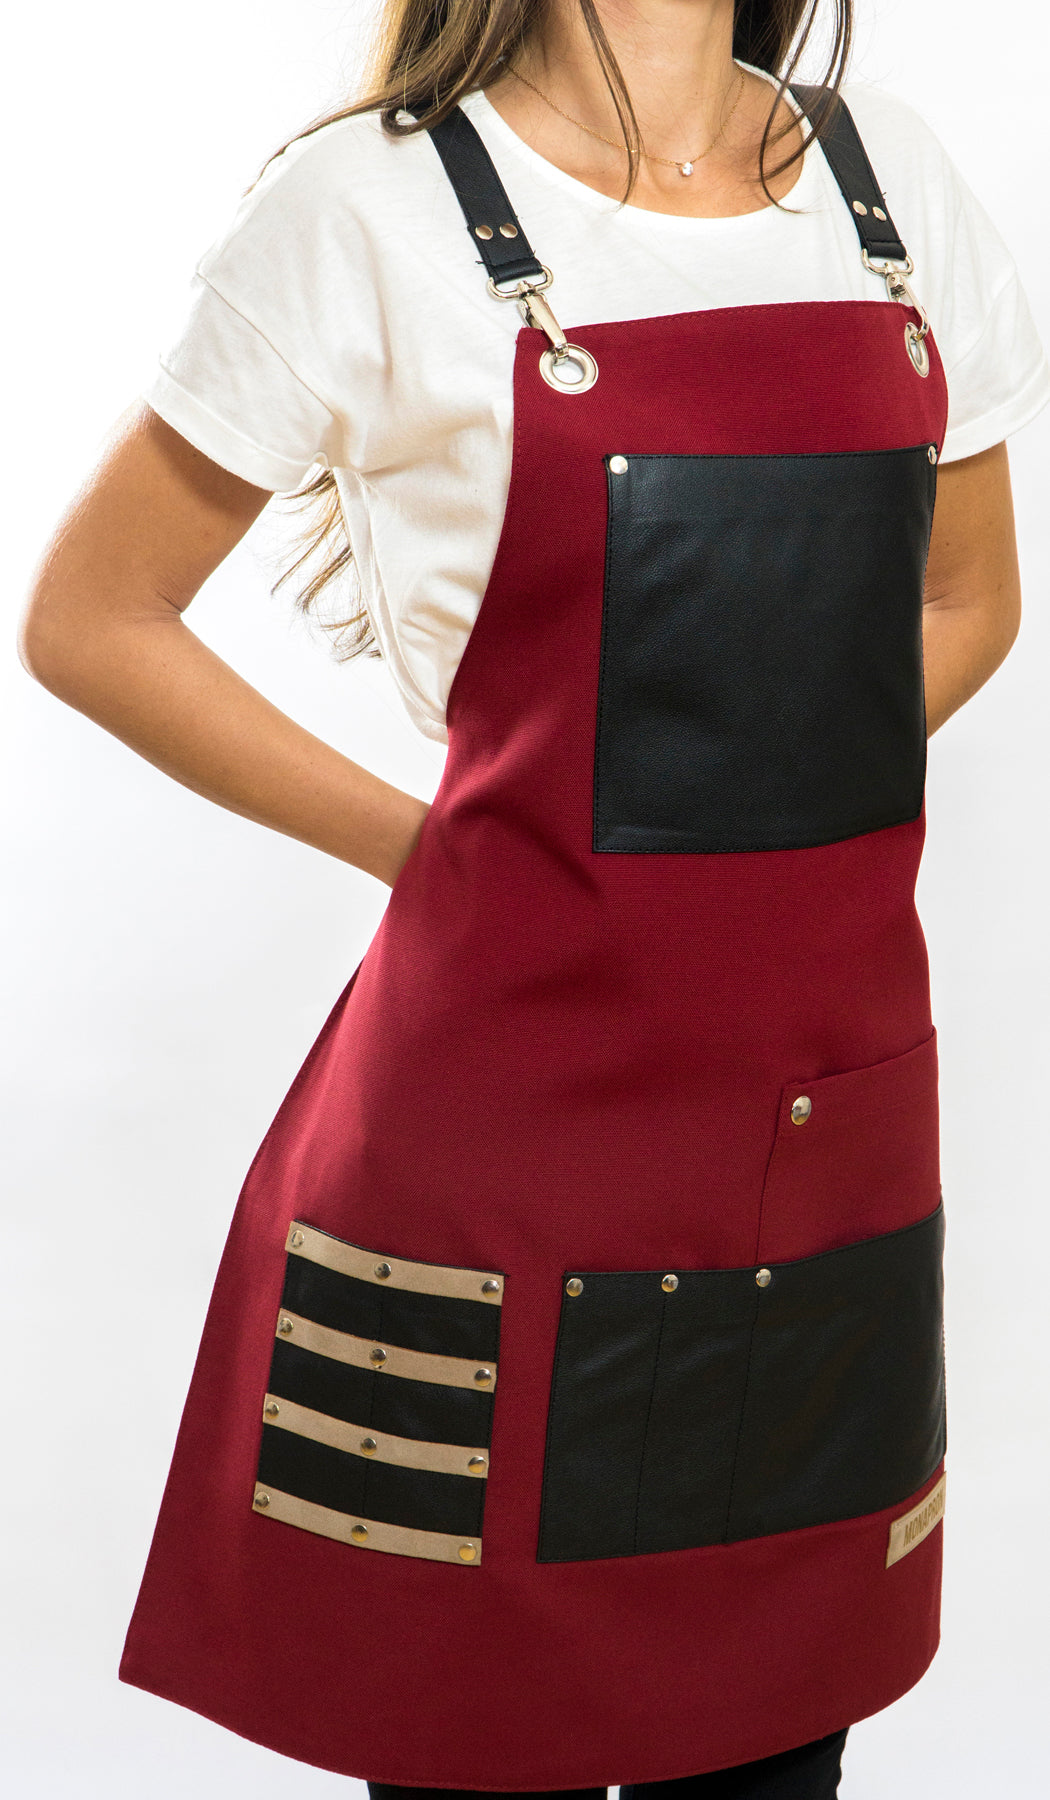 09 Titian Red Apron